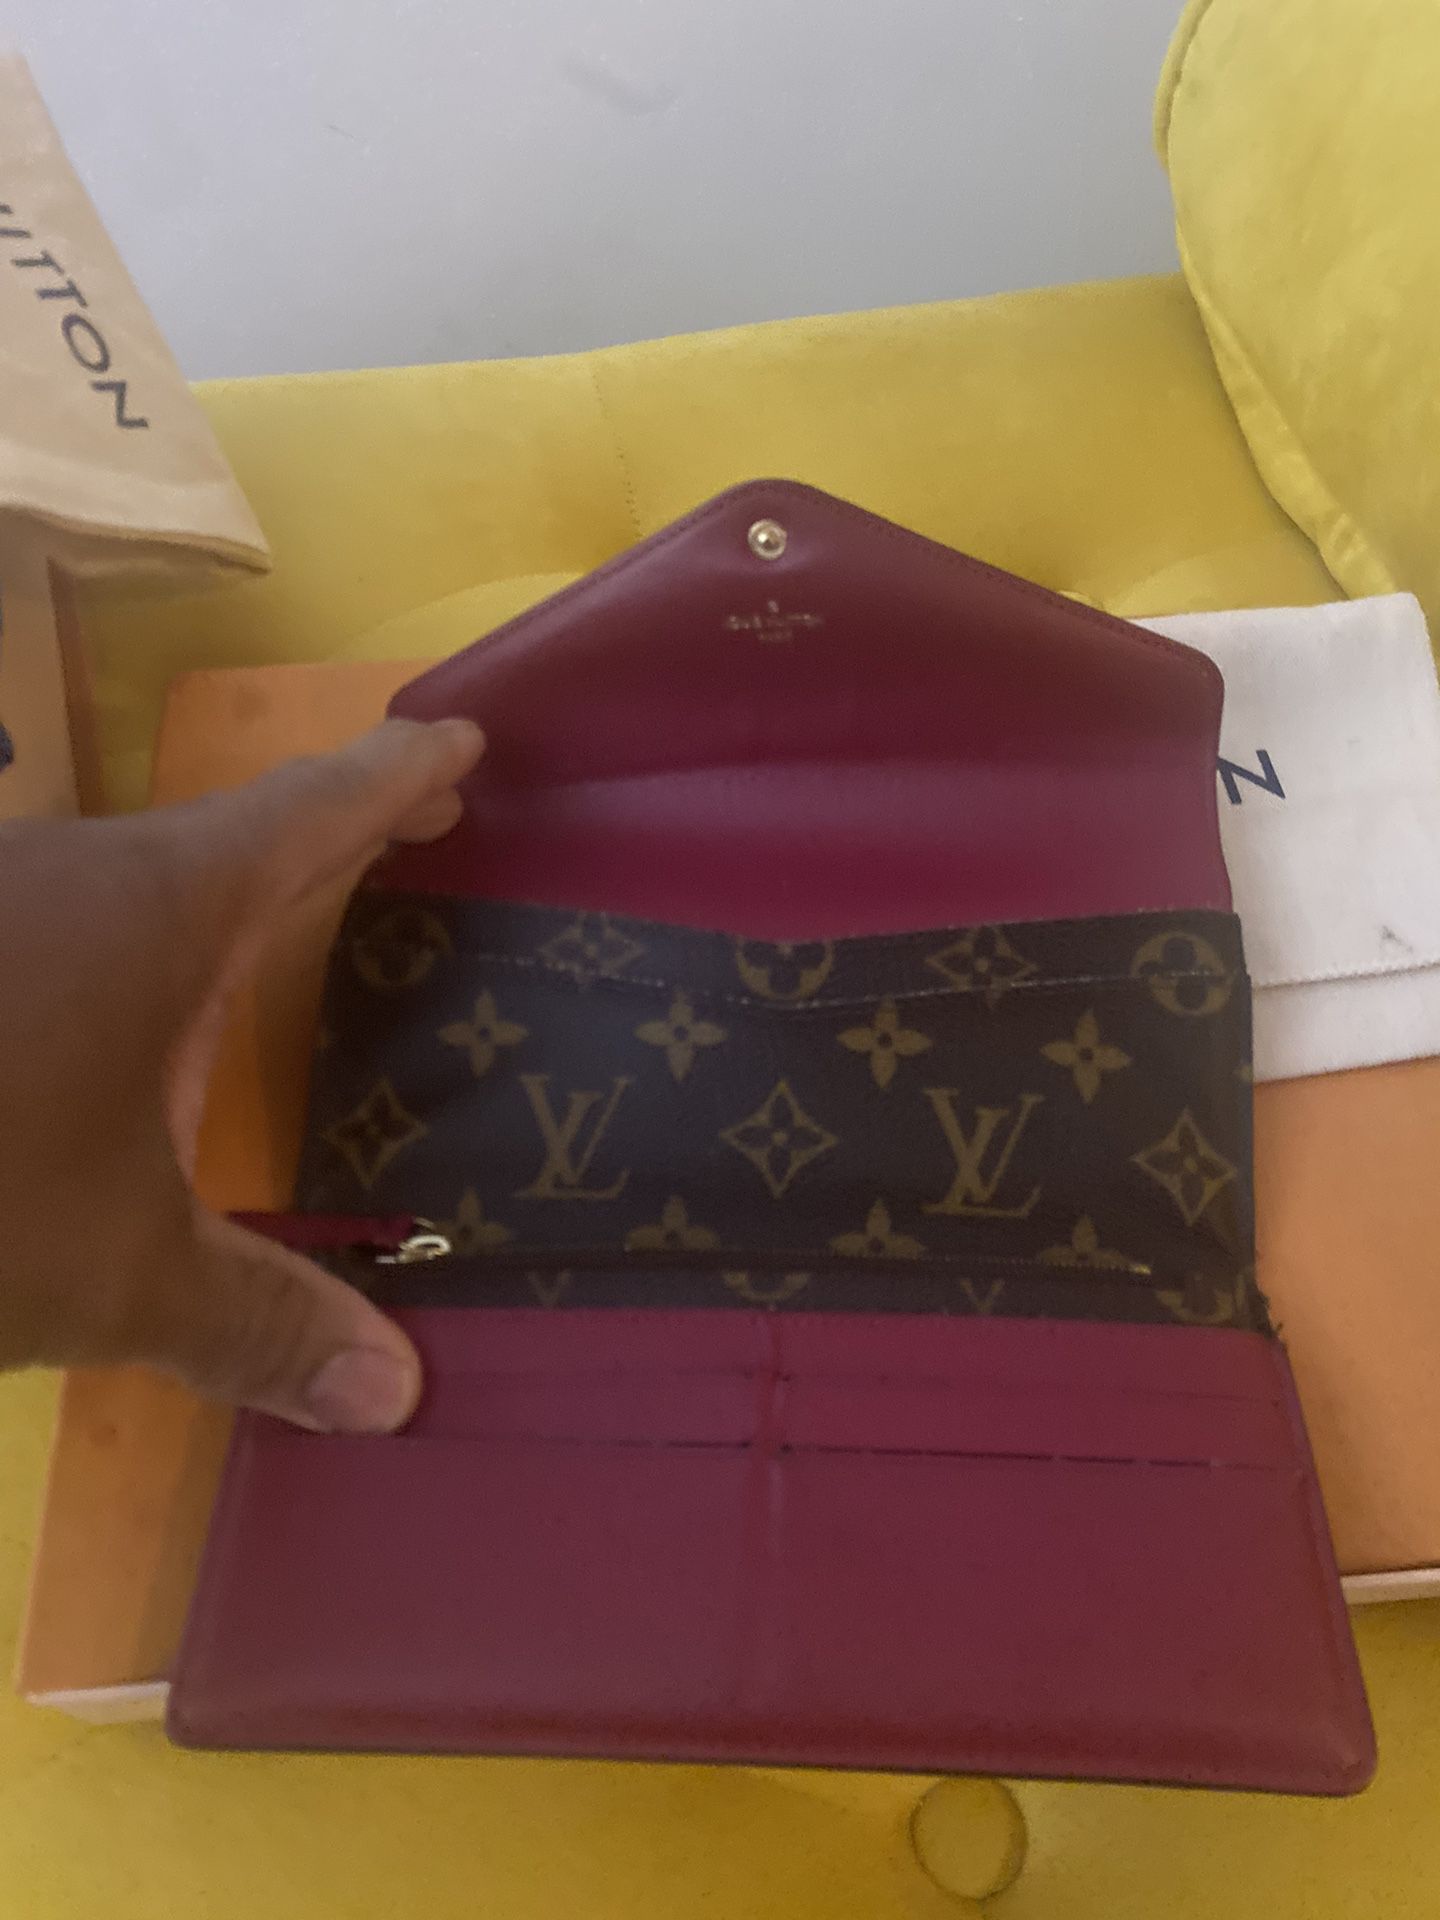 Women Used Louis Vuitton Wallet In Excellent Condition Price $150